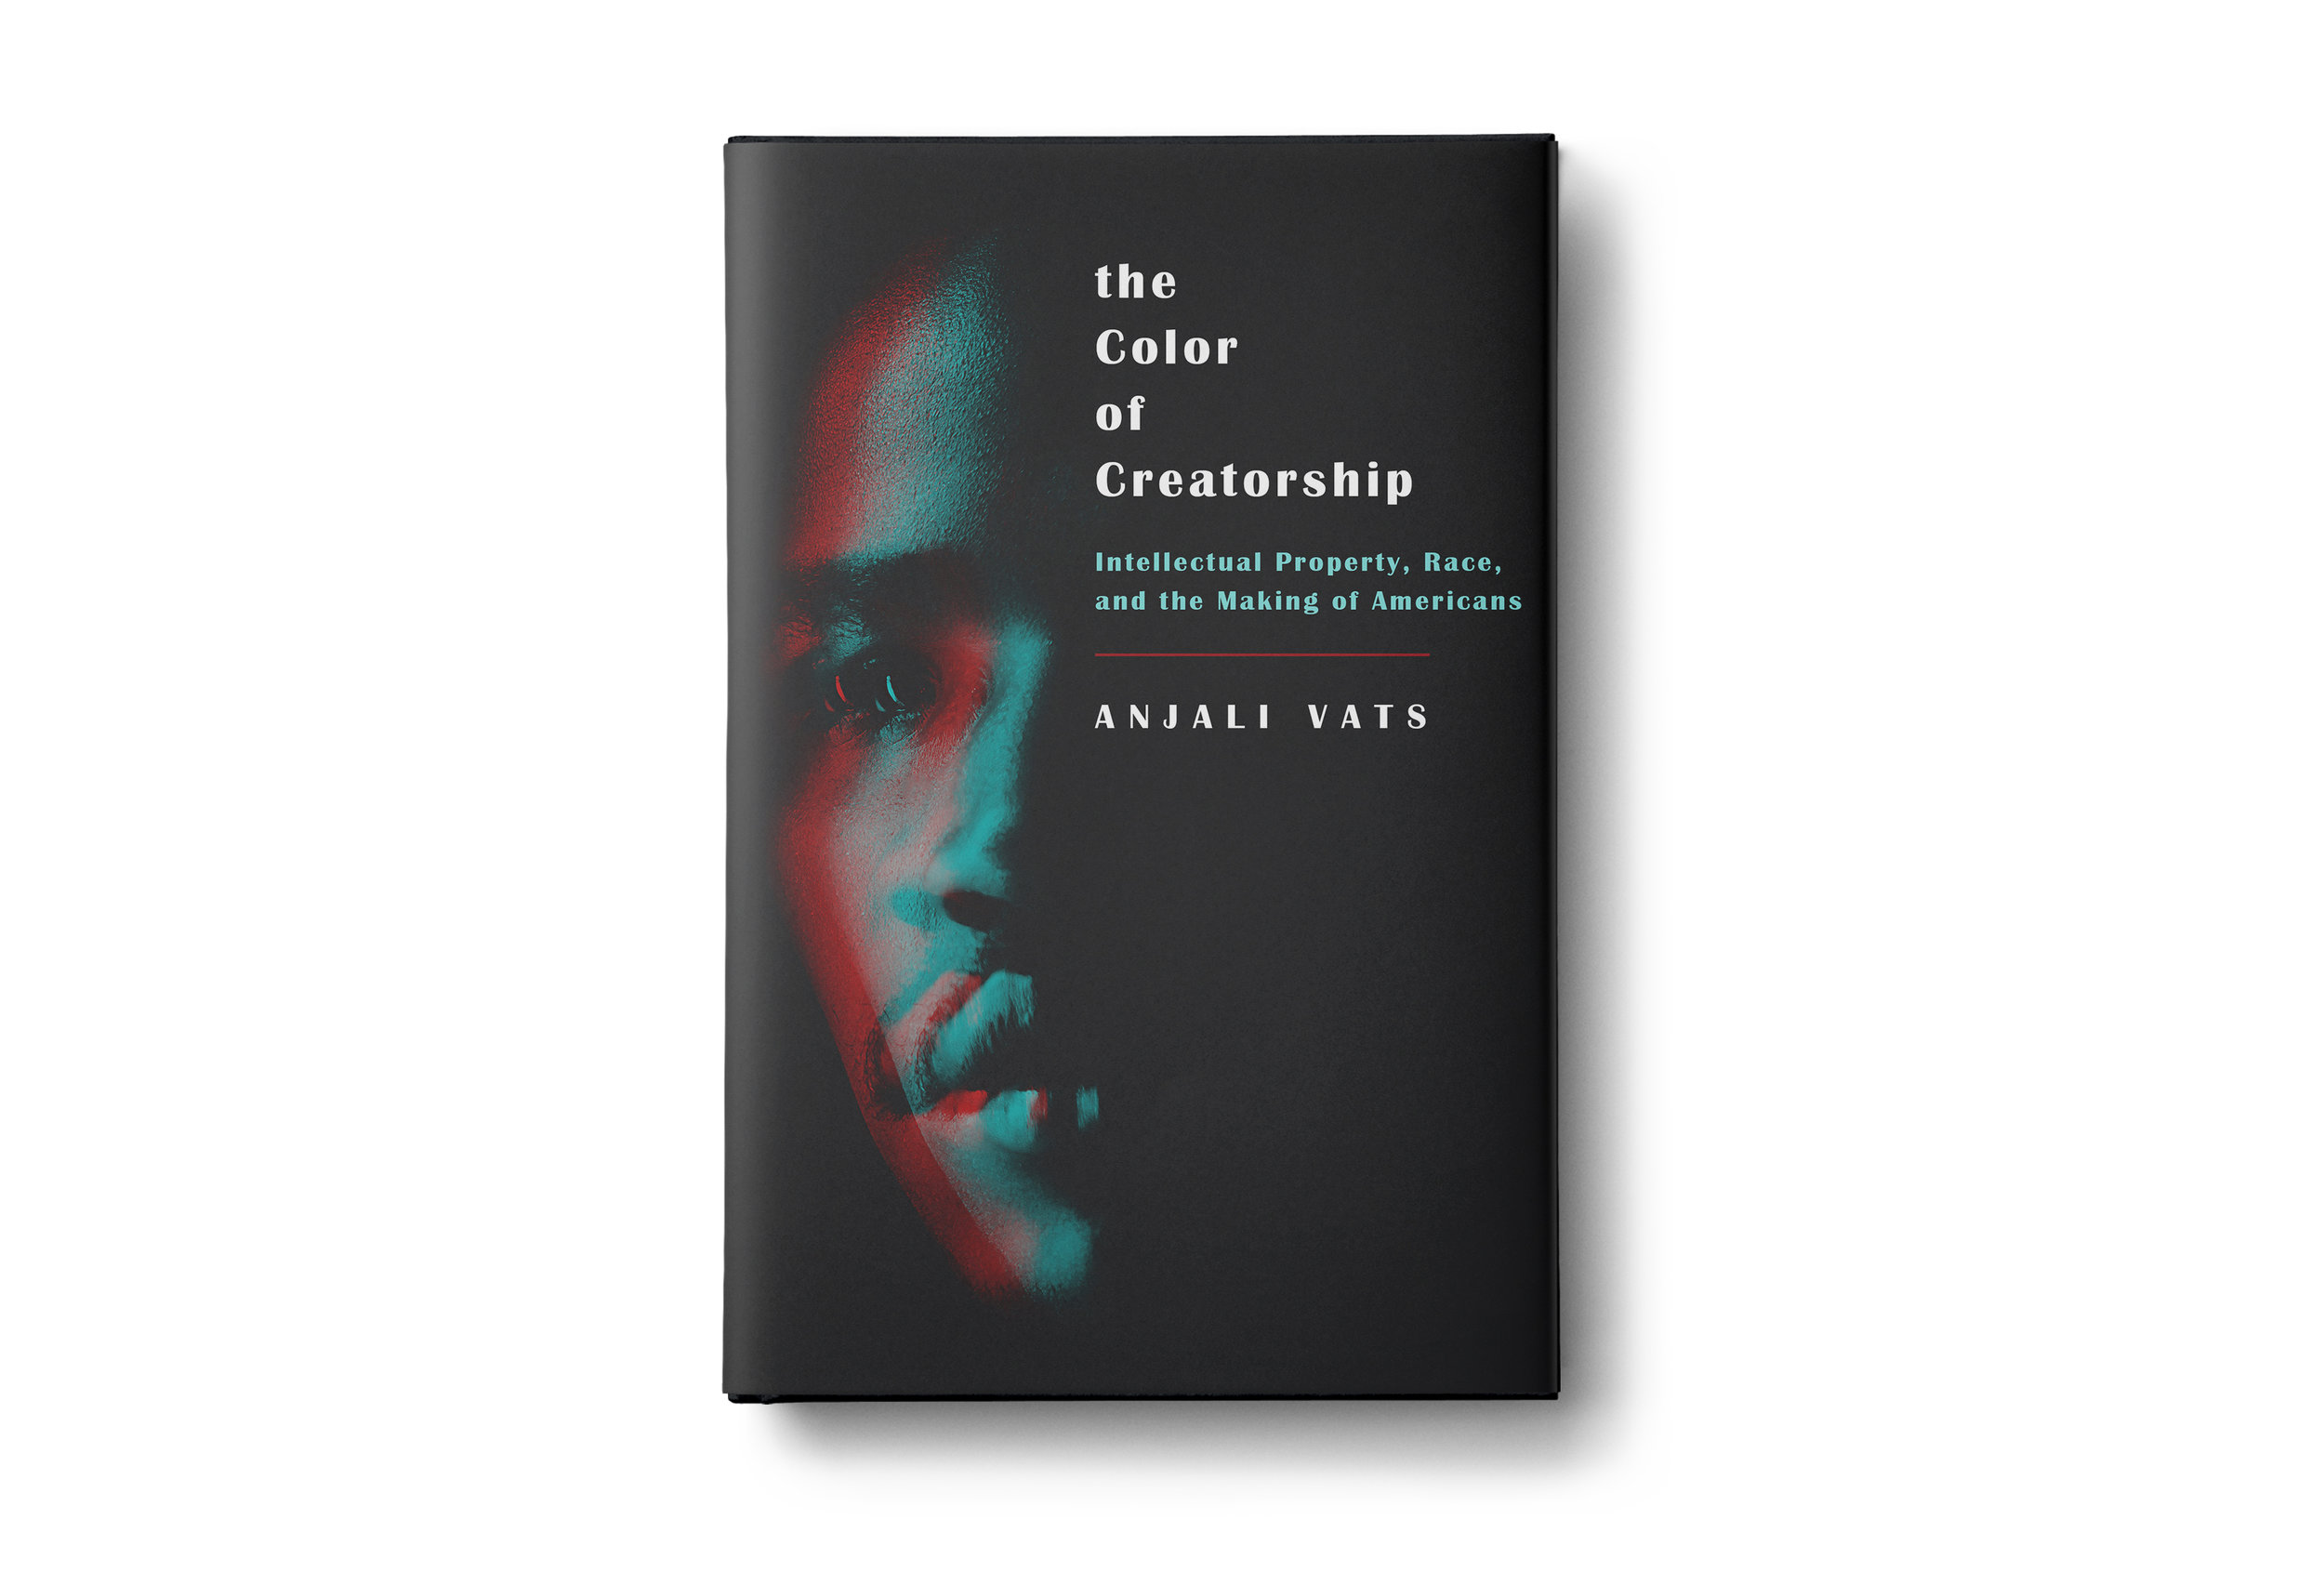 The Color of Creatorship, rejected cover